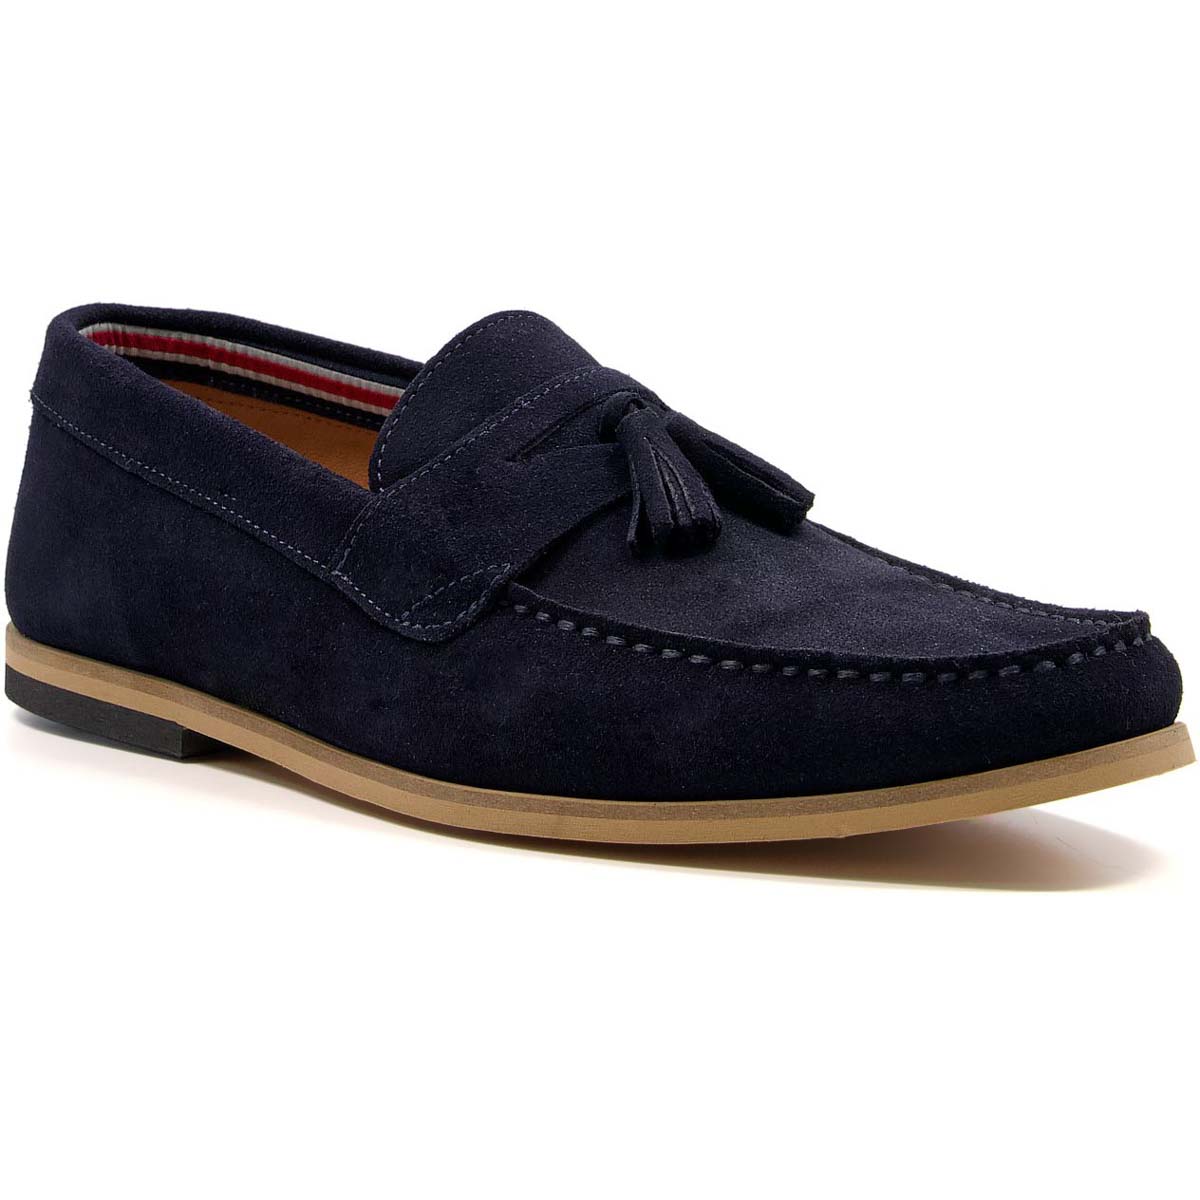 Dune London Bart Navy Mens Slip-on Shoes 2745063800081 in a Plain Leather in Size 12